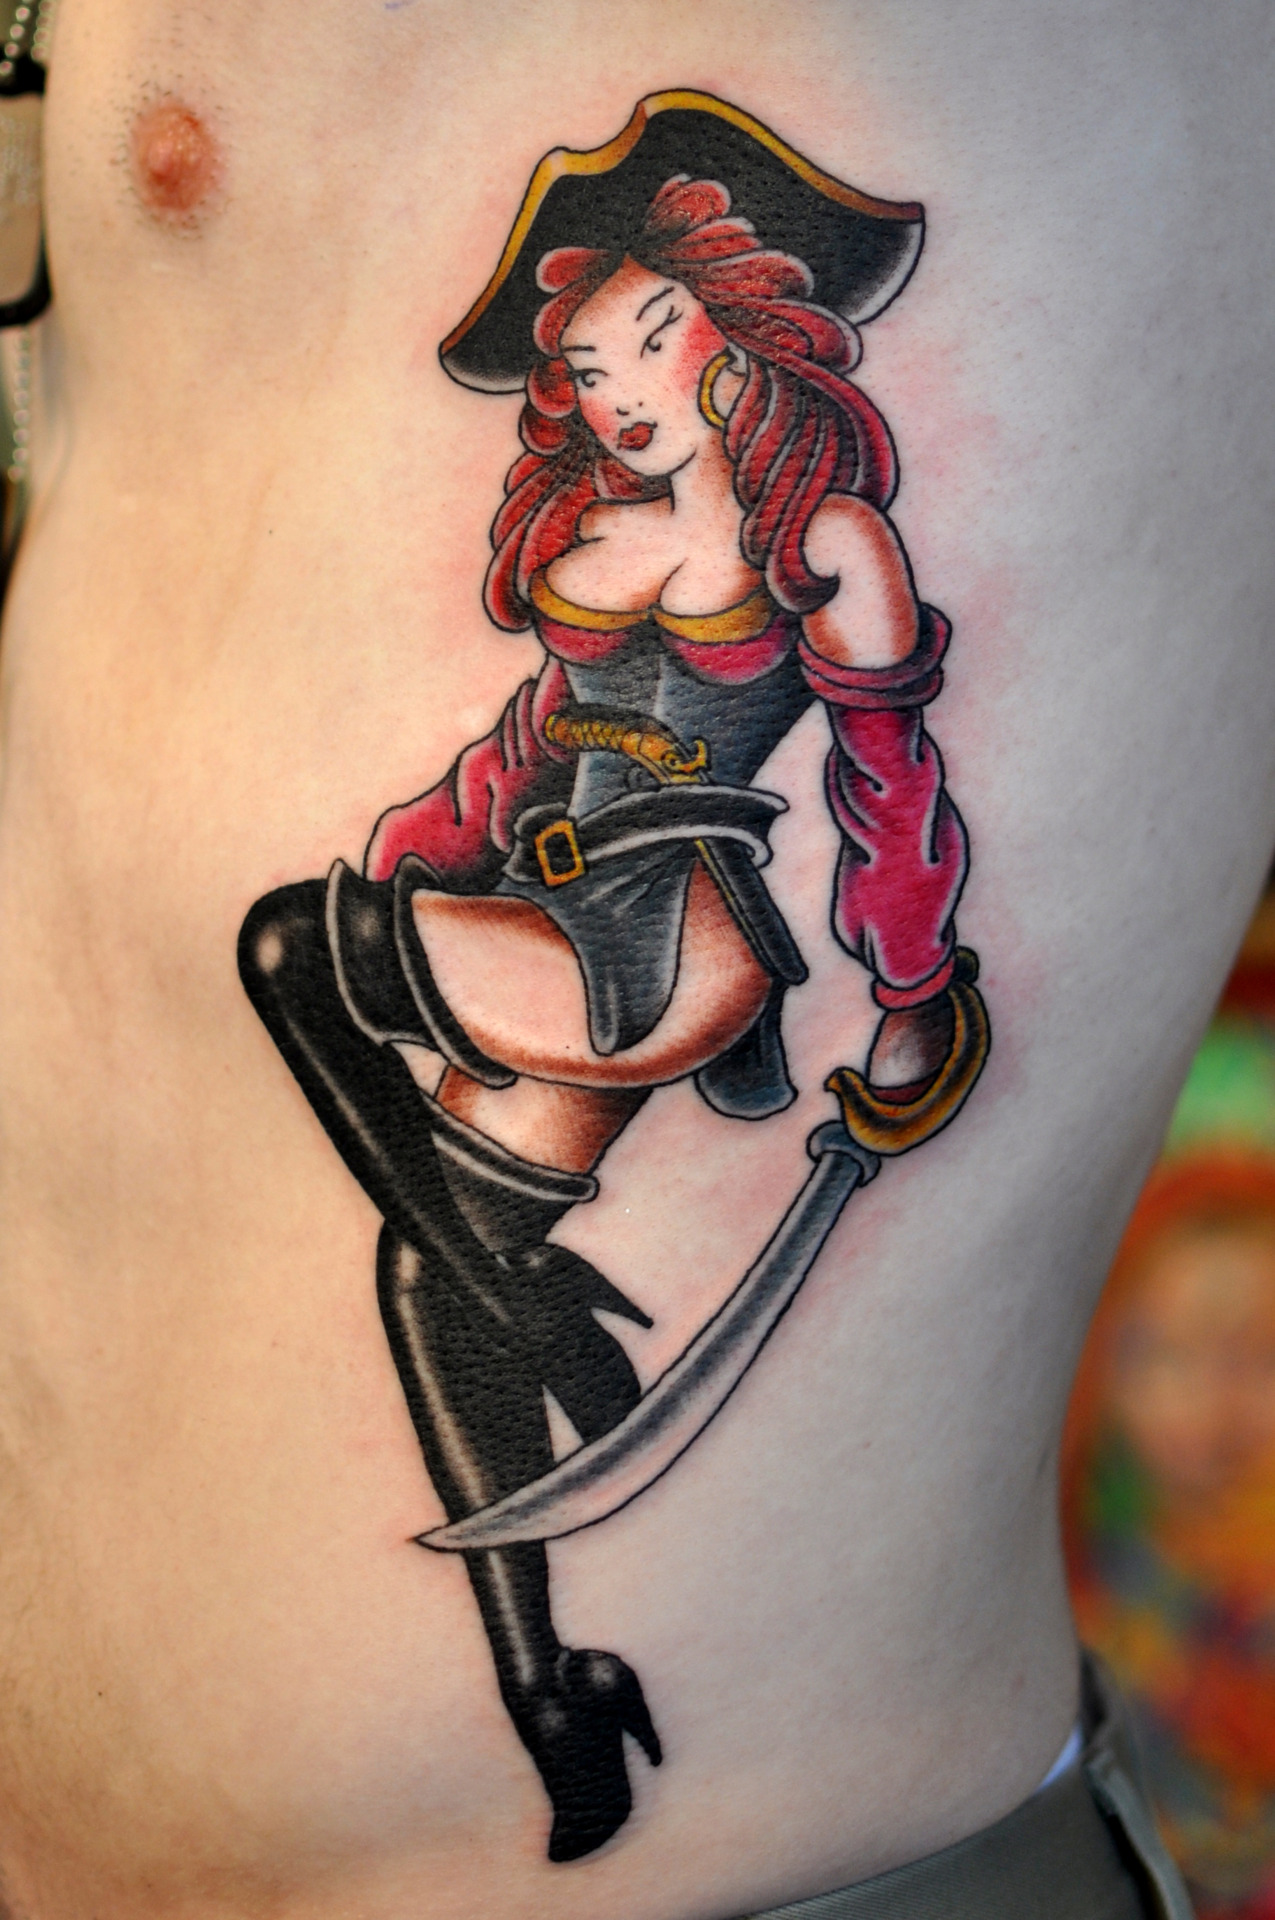 Tattoo Aesthetic Pirate Pin Up Girl